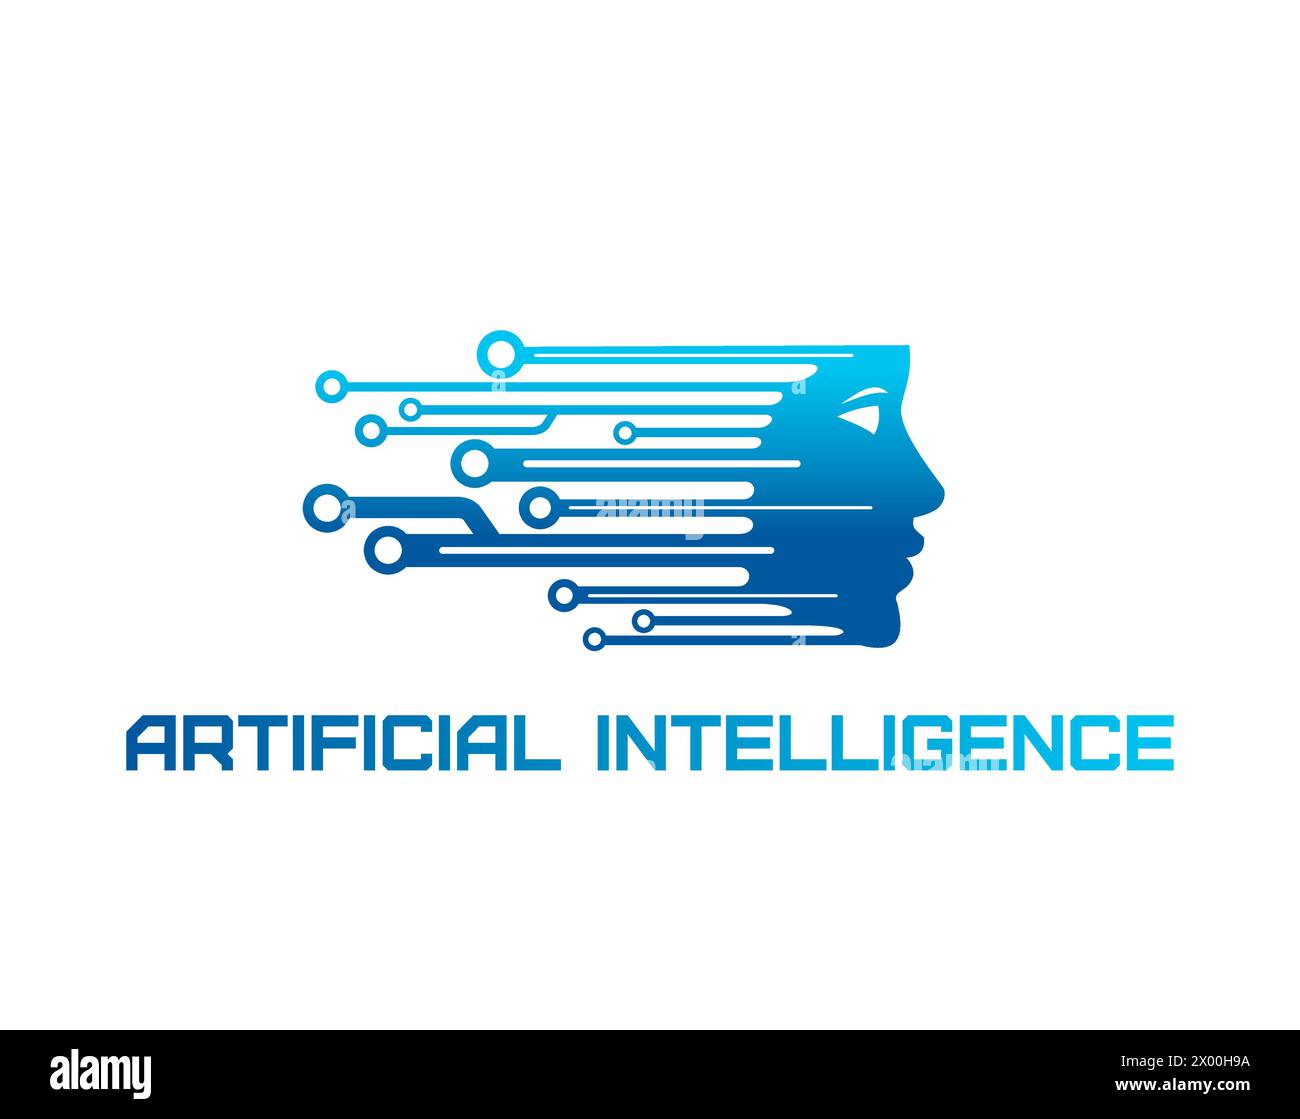 AI artificial intelligence icon, data technology. Isolated vector emblem with stylized human or robot head profile with nodes or circuits, symbolizing neural networks and machine learning algorithms Stock Vector